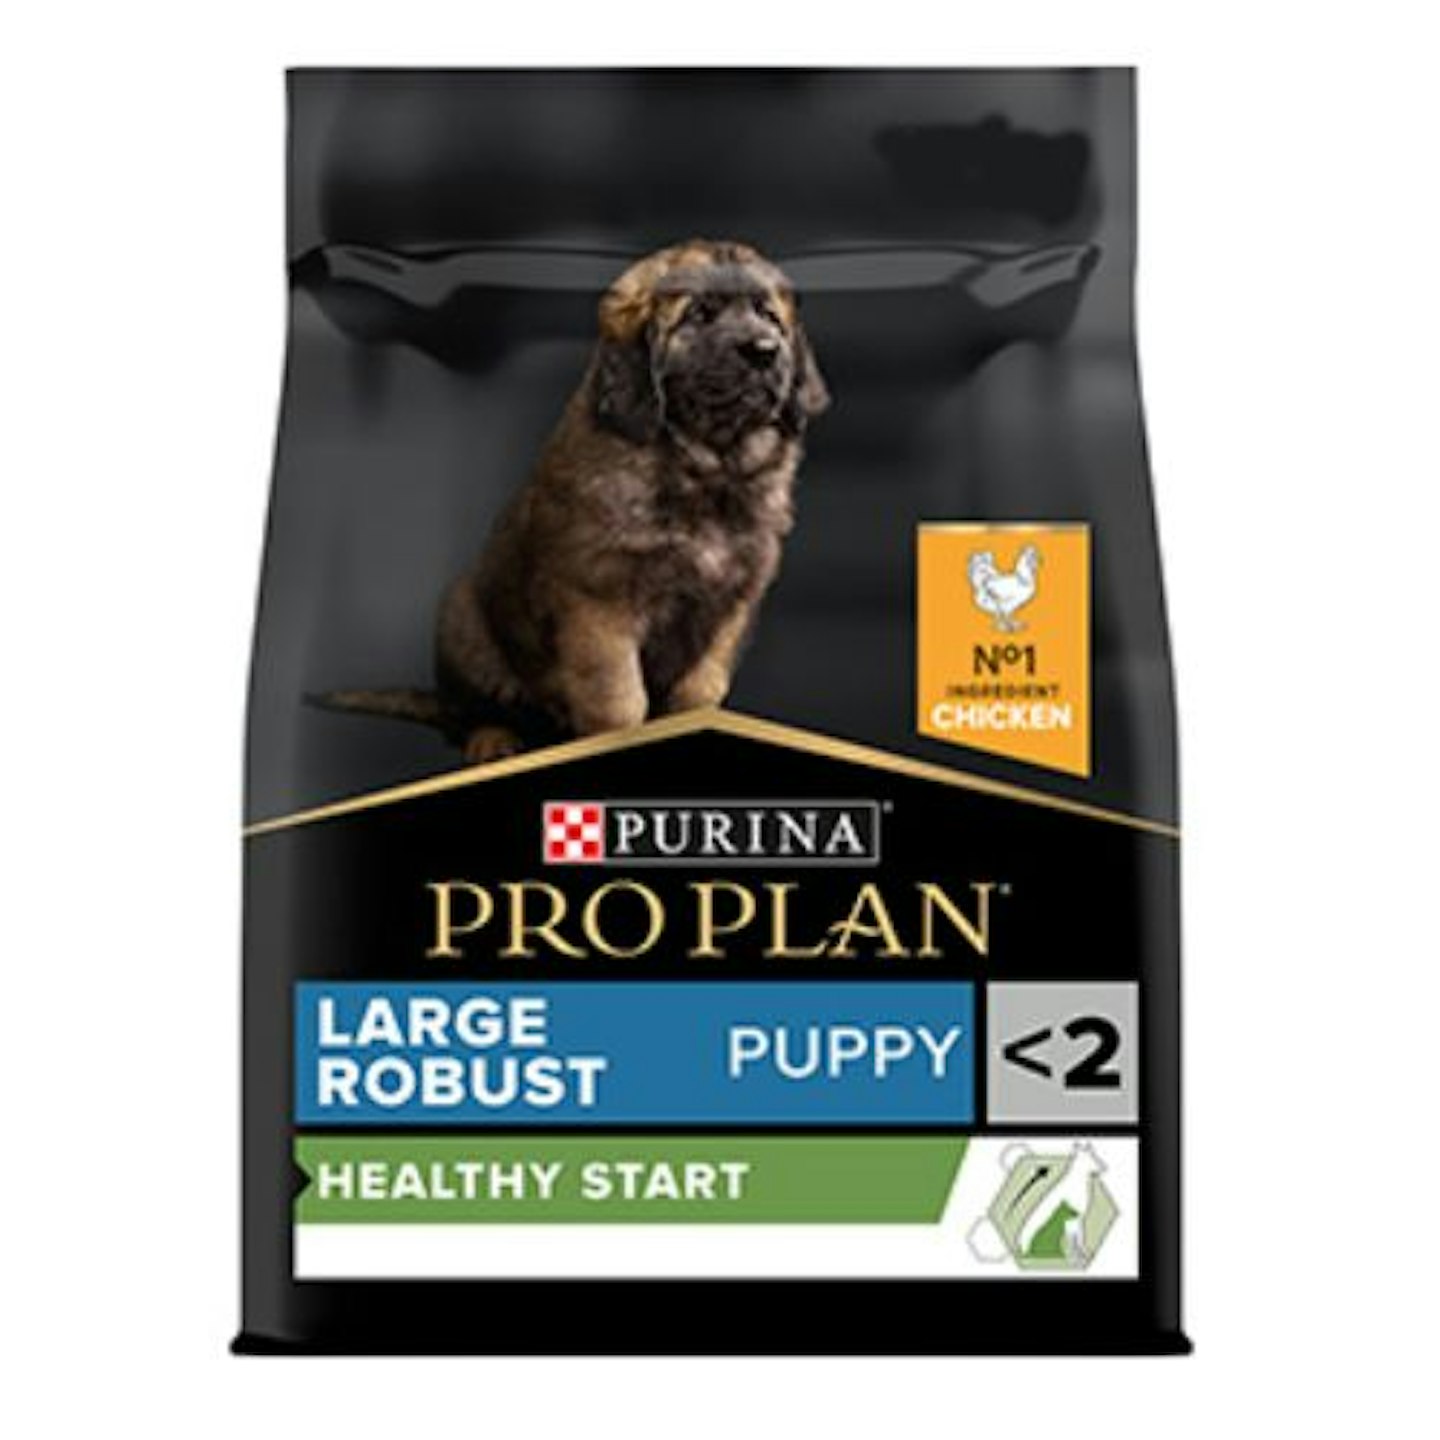 PRO PLAN Large Robust Puppy Dry Dog Food Chicken